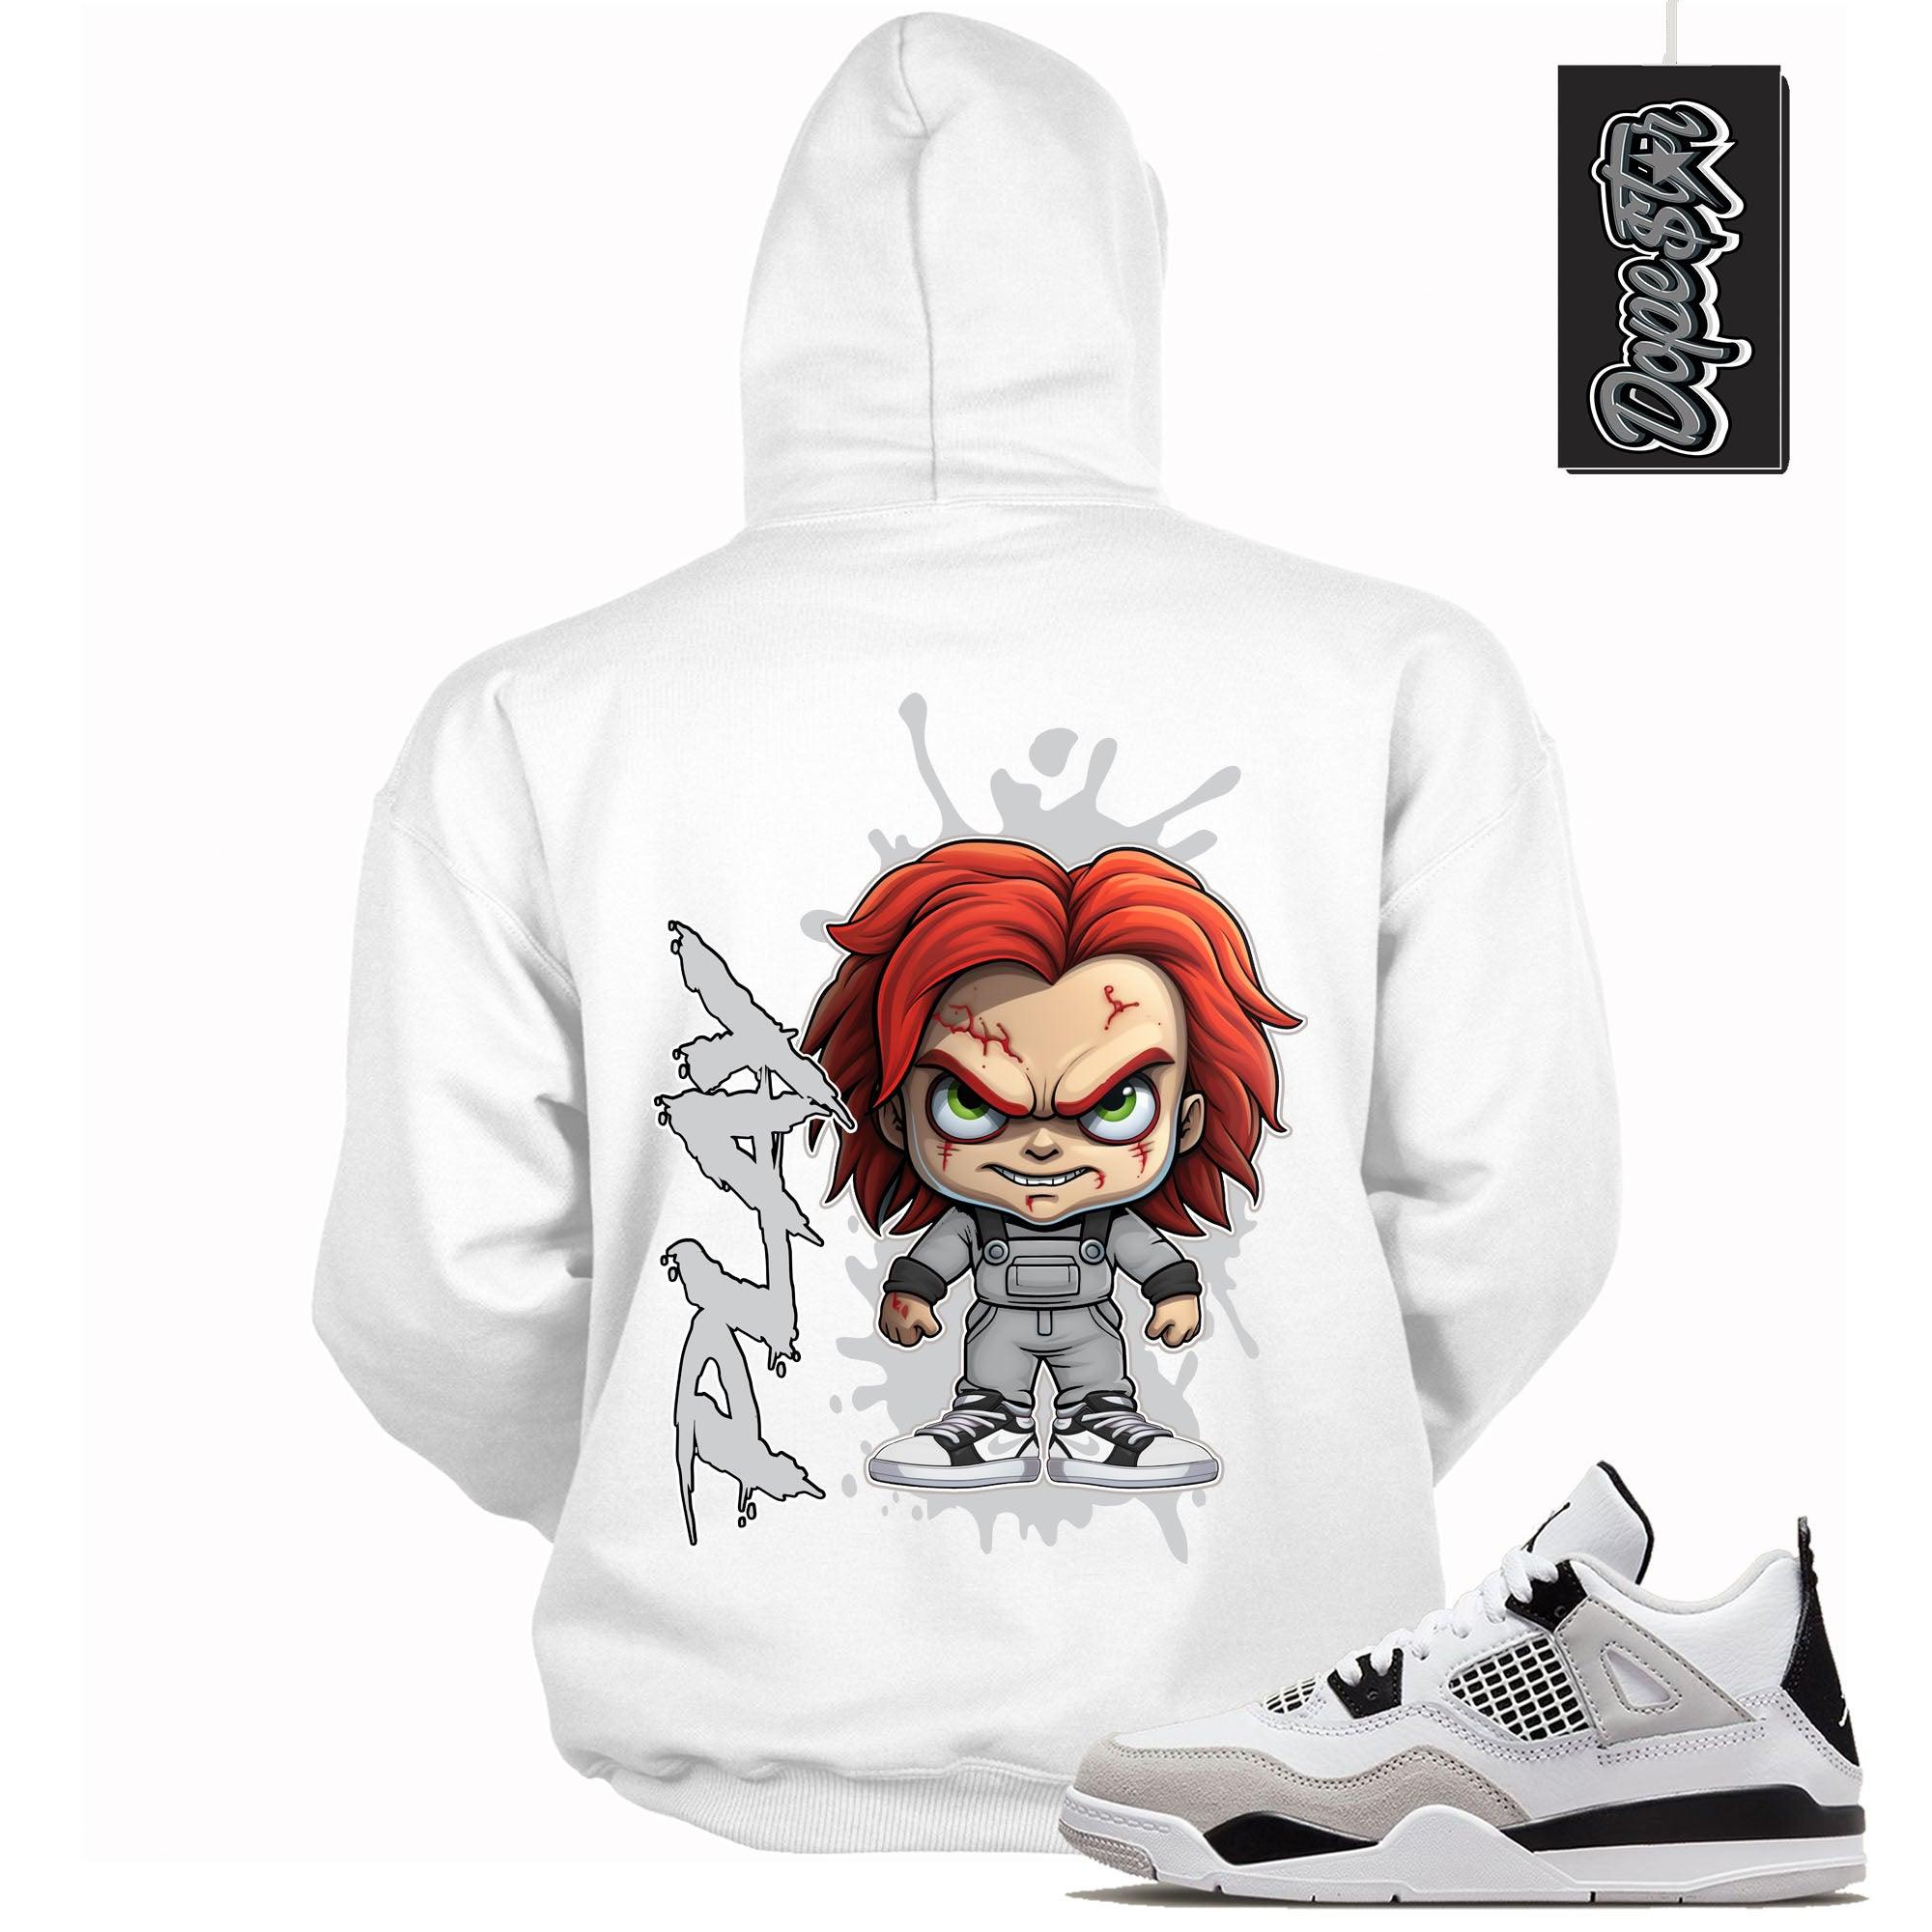 Cool White Hoodie With Chucky Play design That Perfectly Matches AIR JORDAN 4 RETRO MILITARY BLACK Sneakers.